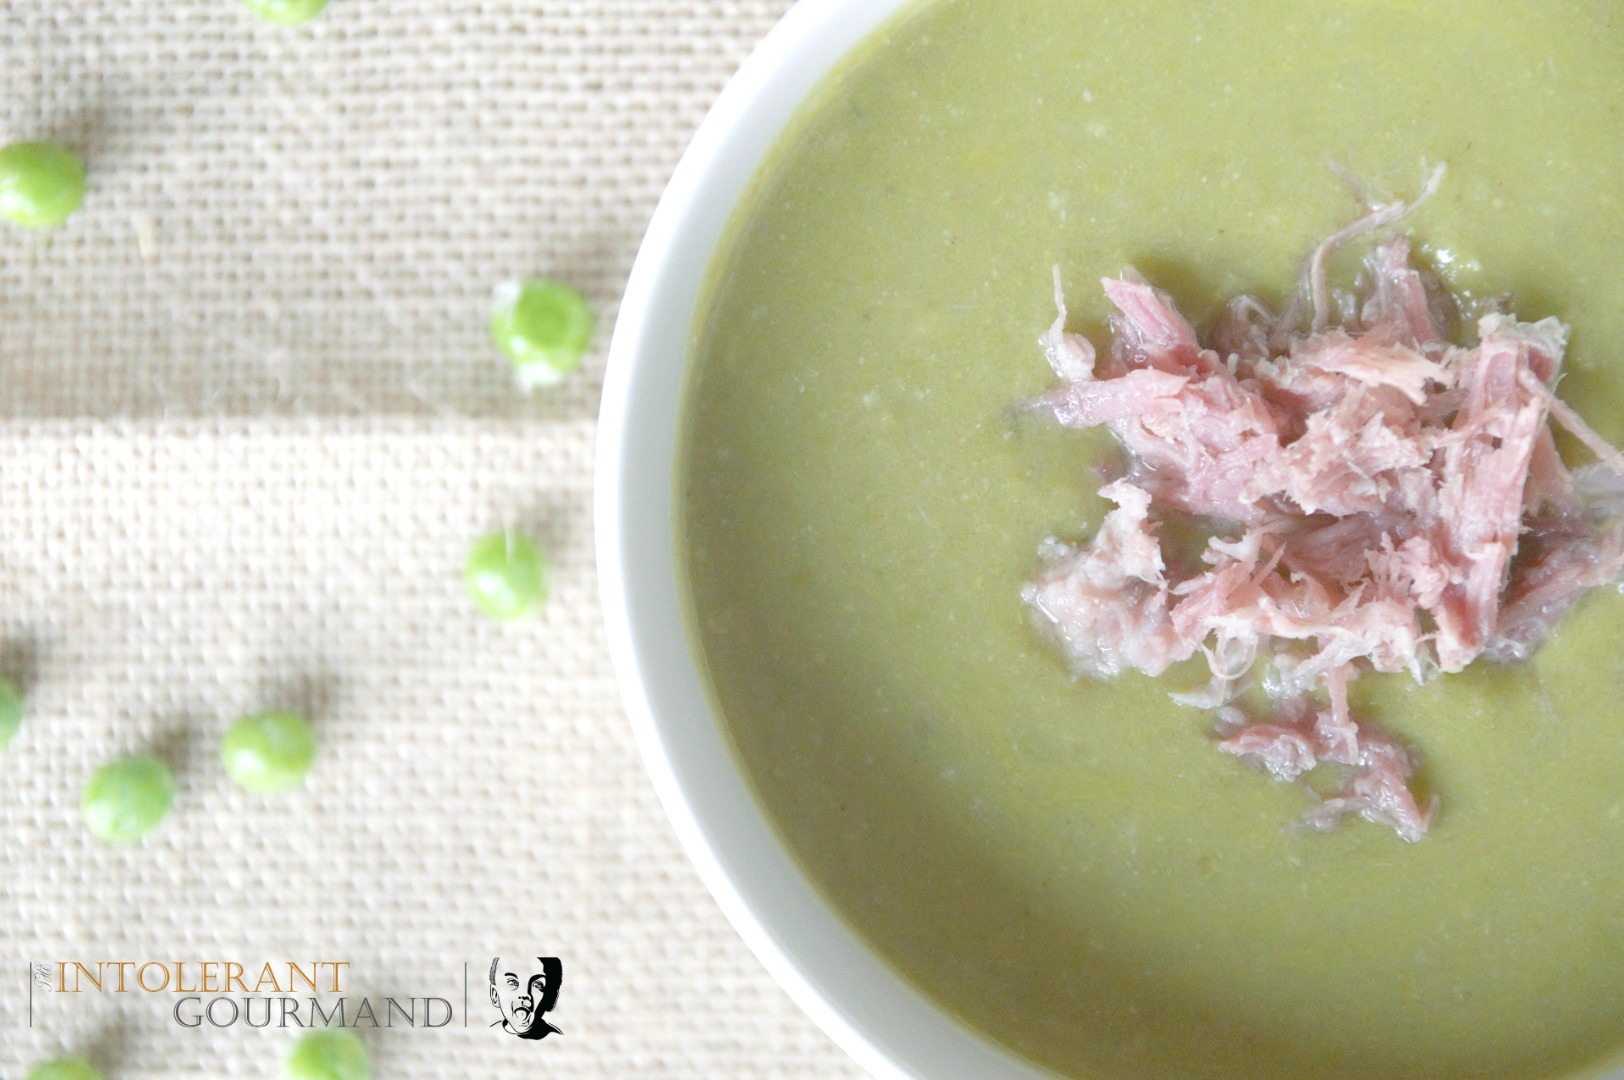 Green veg soup - naturally gluten-free, packed full of vitamins and nutrients, delicious and simple to make! Perfect for lunch or light dinner! www.intolerantgourmand.com